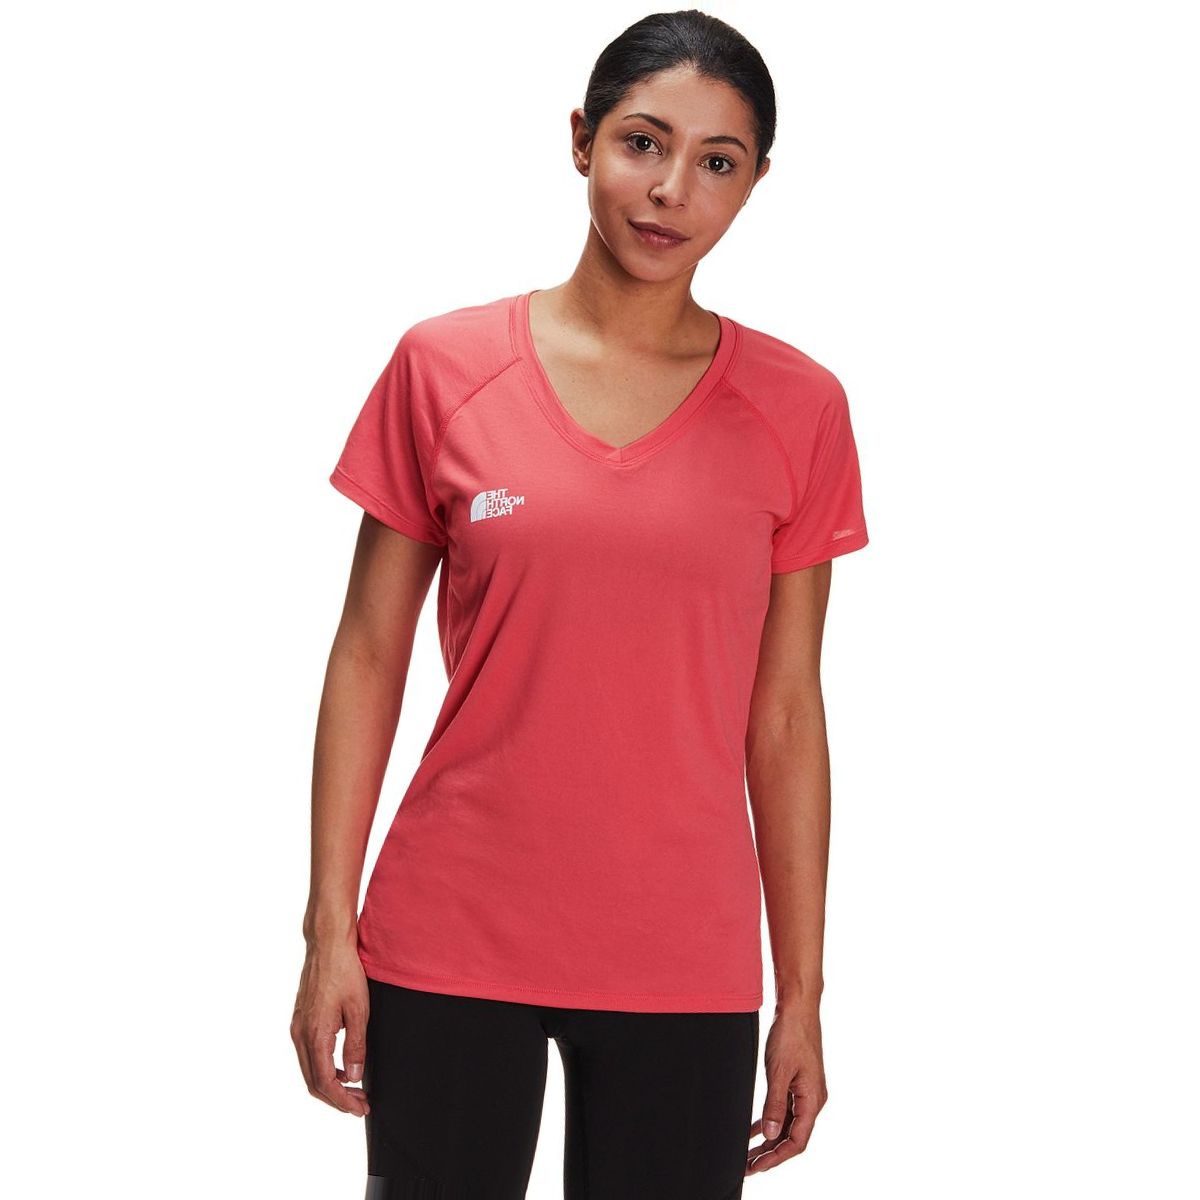 The North Face Reaxion Amp V-Neck T-Shirt - Women's